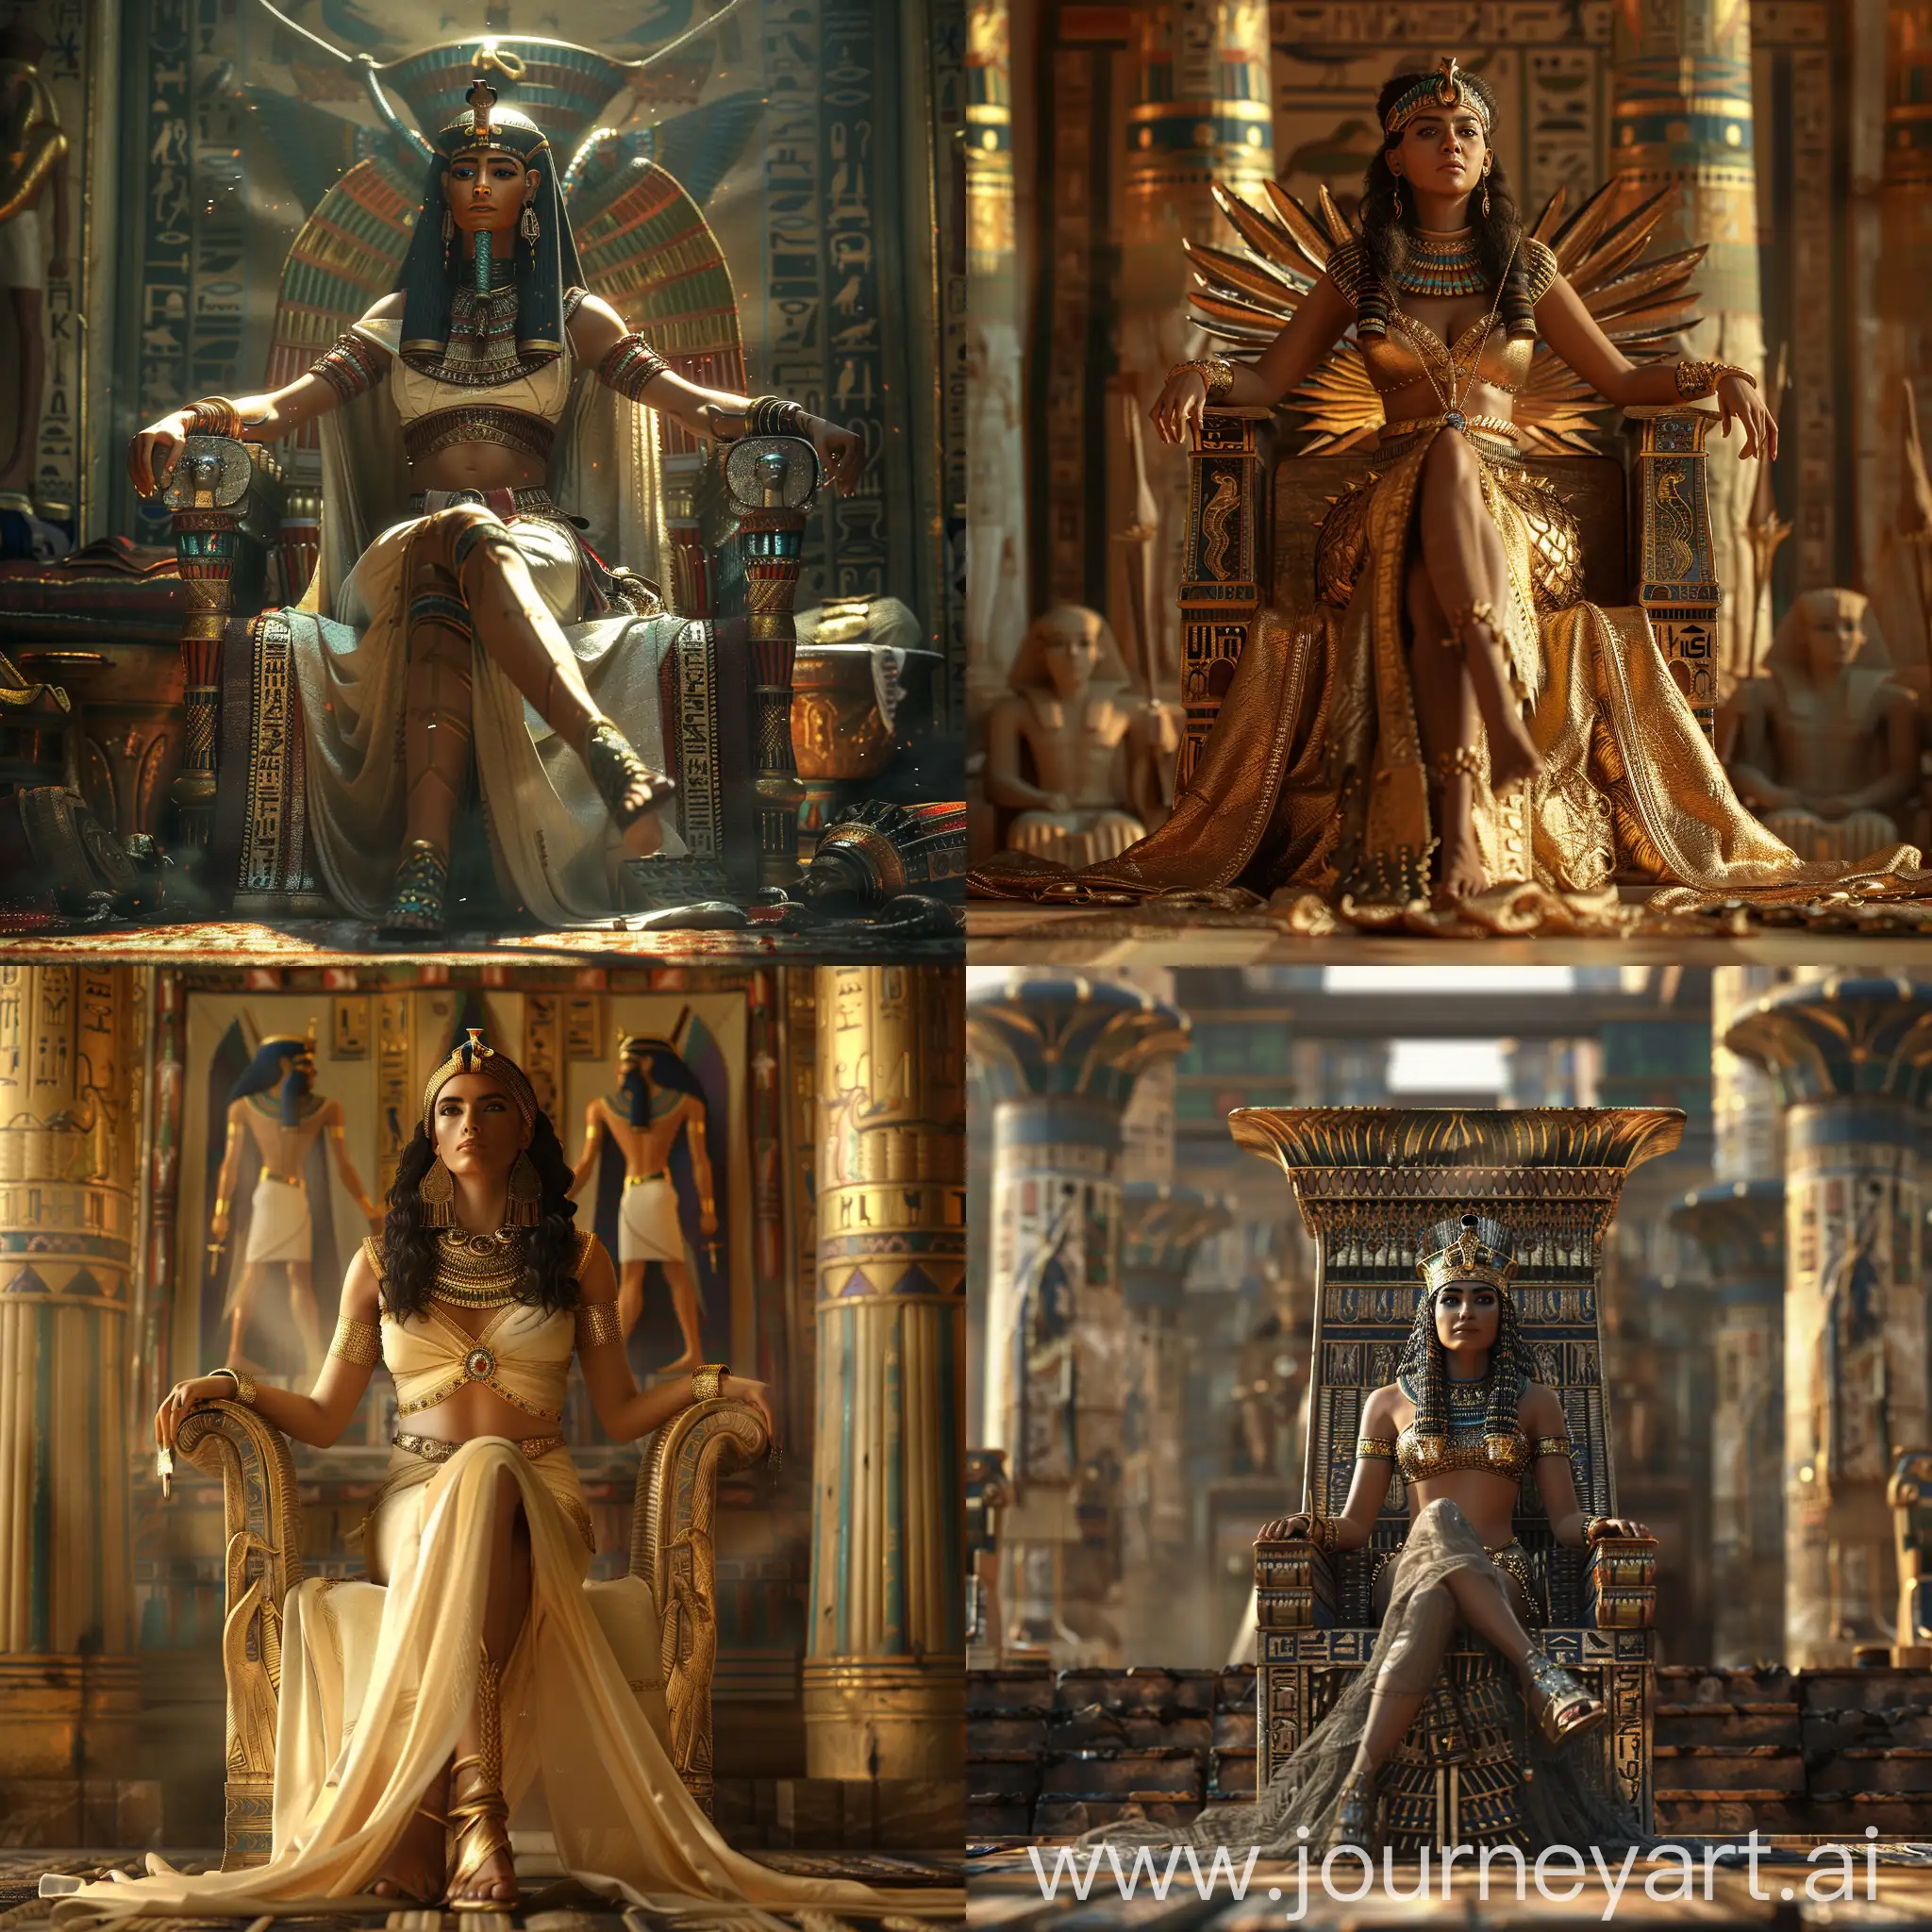 Queen-of-Ancient-Egypt-Sitting-on-Throne-in-Dramatic-Cinematic-Setting